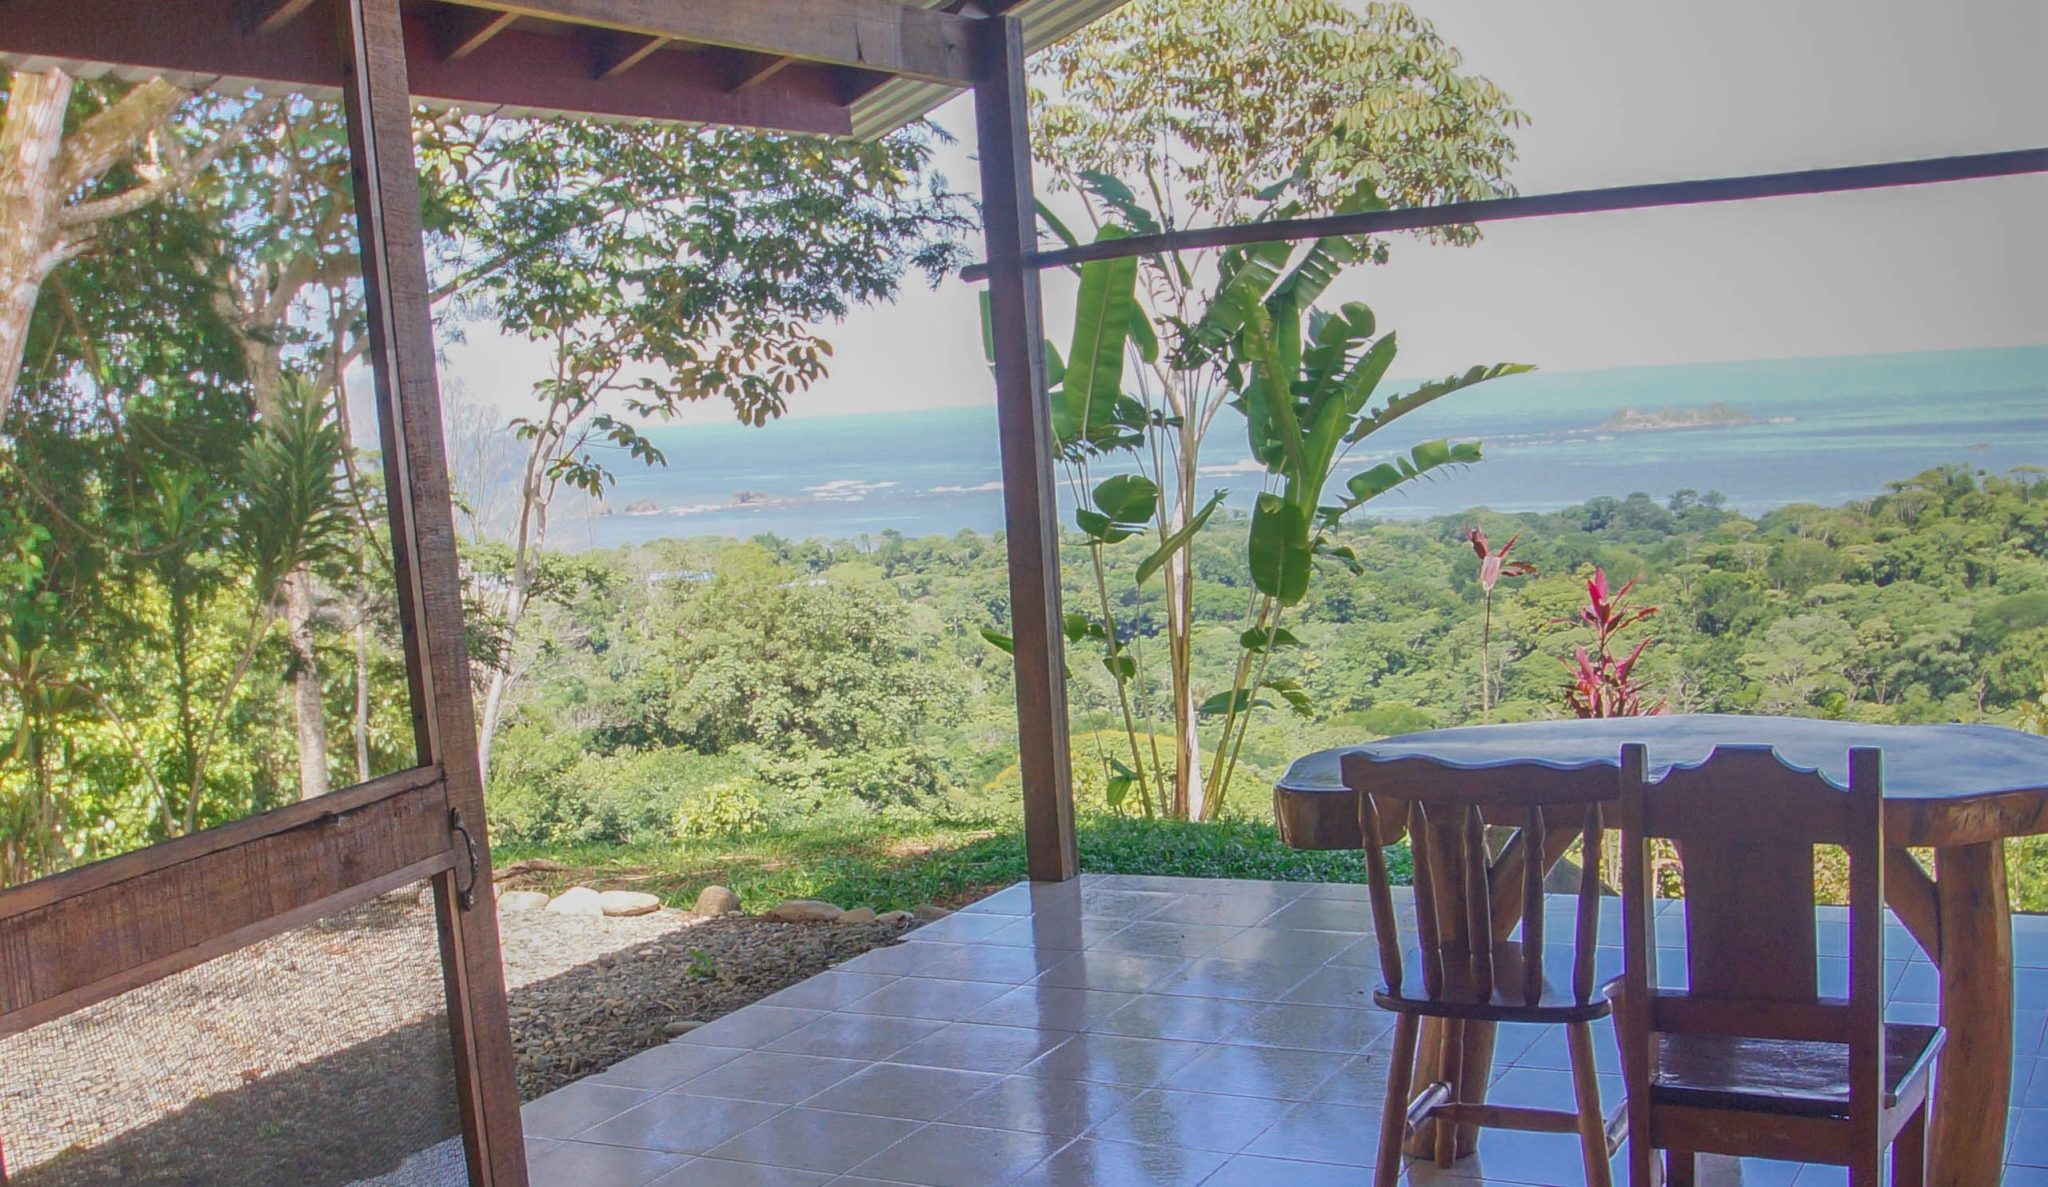 1 ACRE - 2 Bedroom Home With Pool And Incredible Ocean View At Very Affordable Price!!!